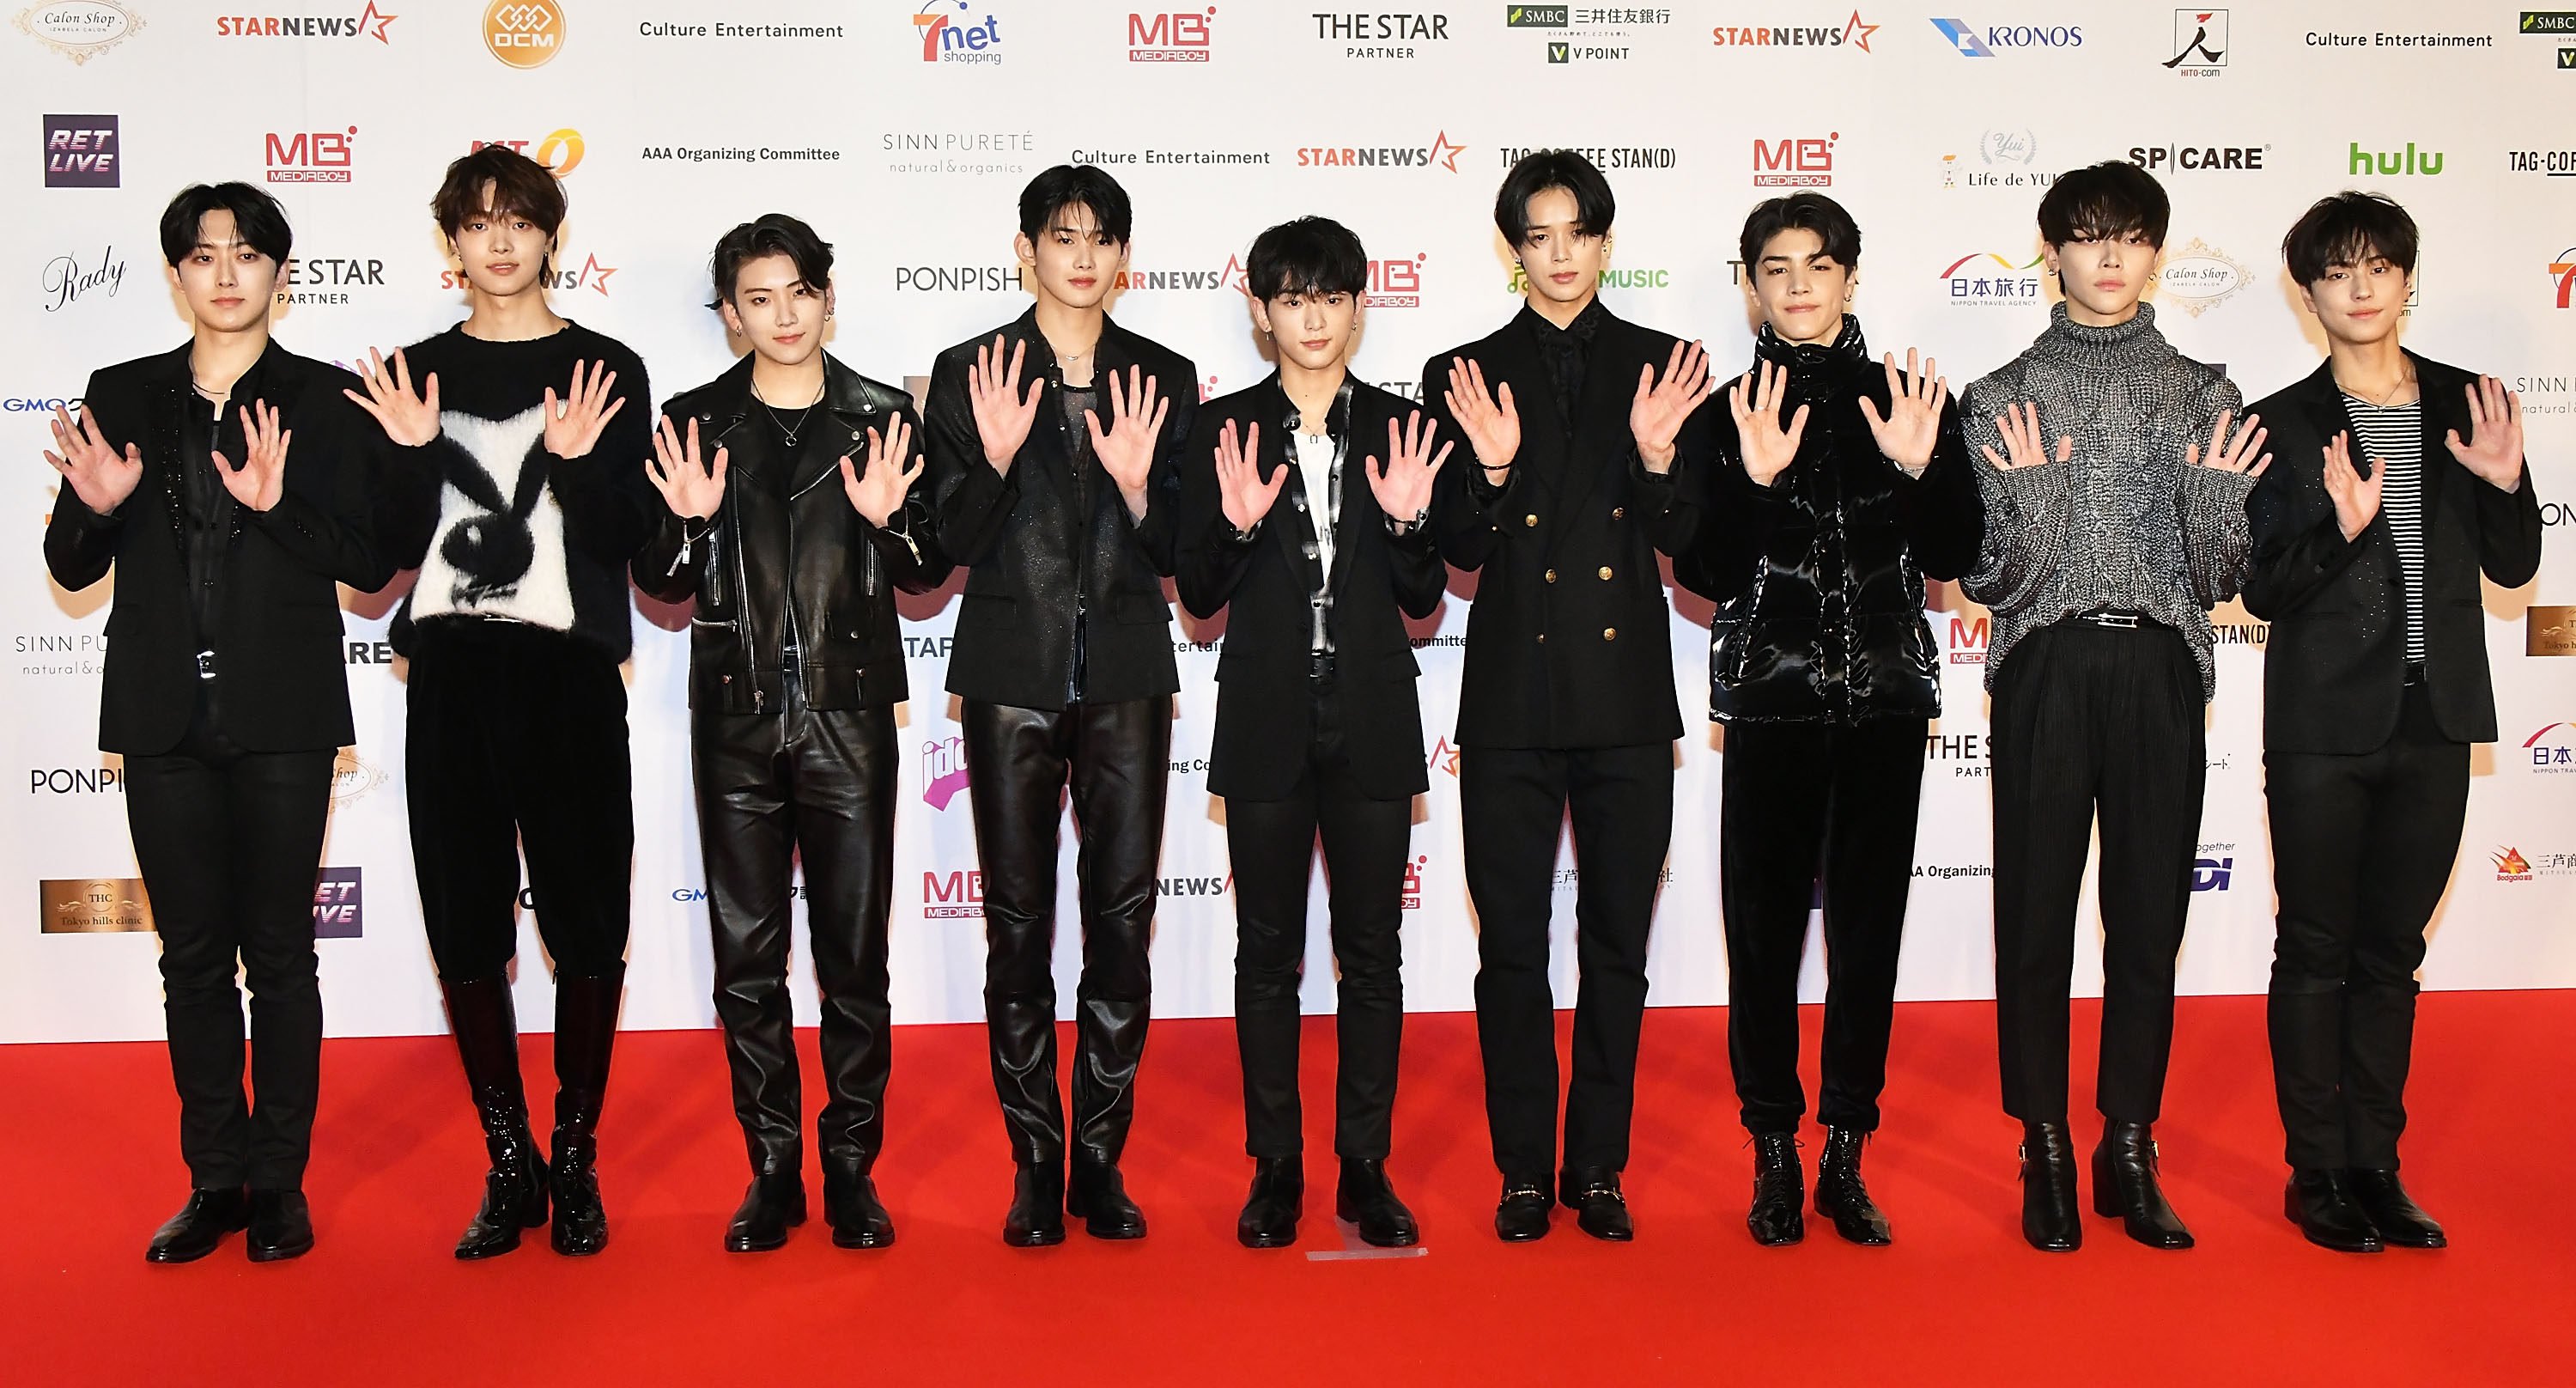 &Team, the first Japanese boy group created by Hybe, at the 2022 Asia Artist Awards In Japan in December 2022 in Japan. They are planning to expand their presence beyond Japan. Photo: WireImage